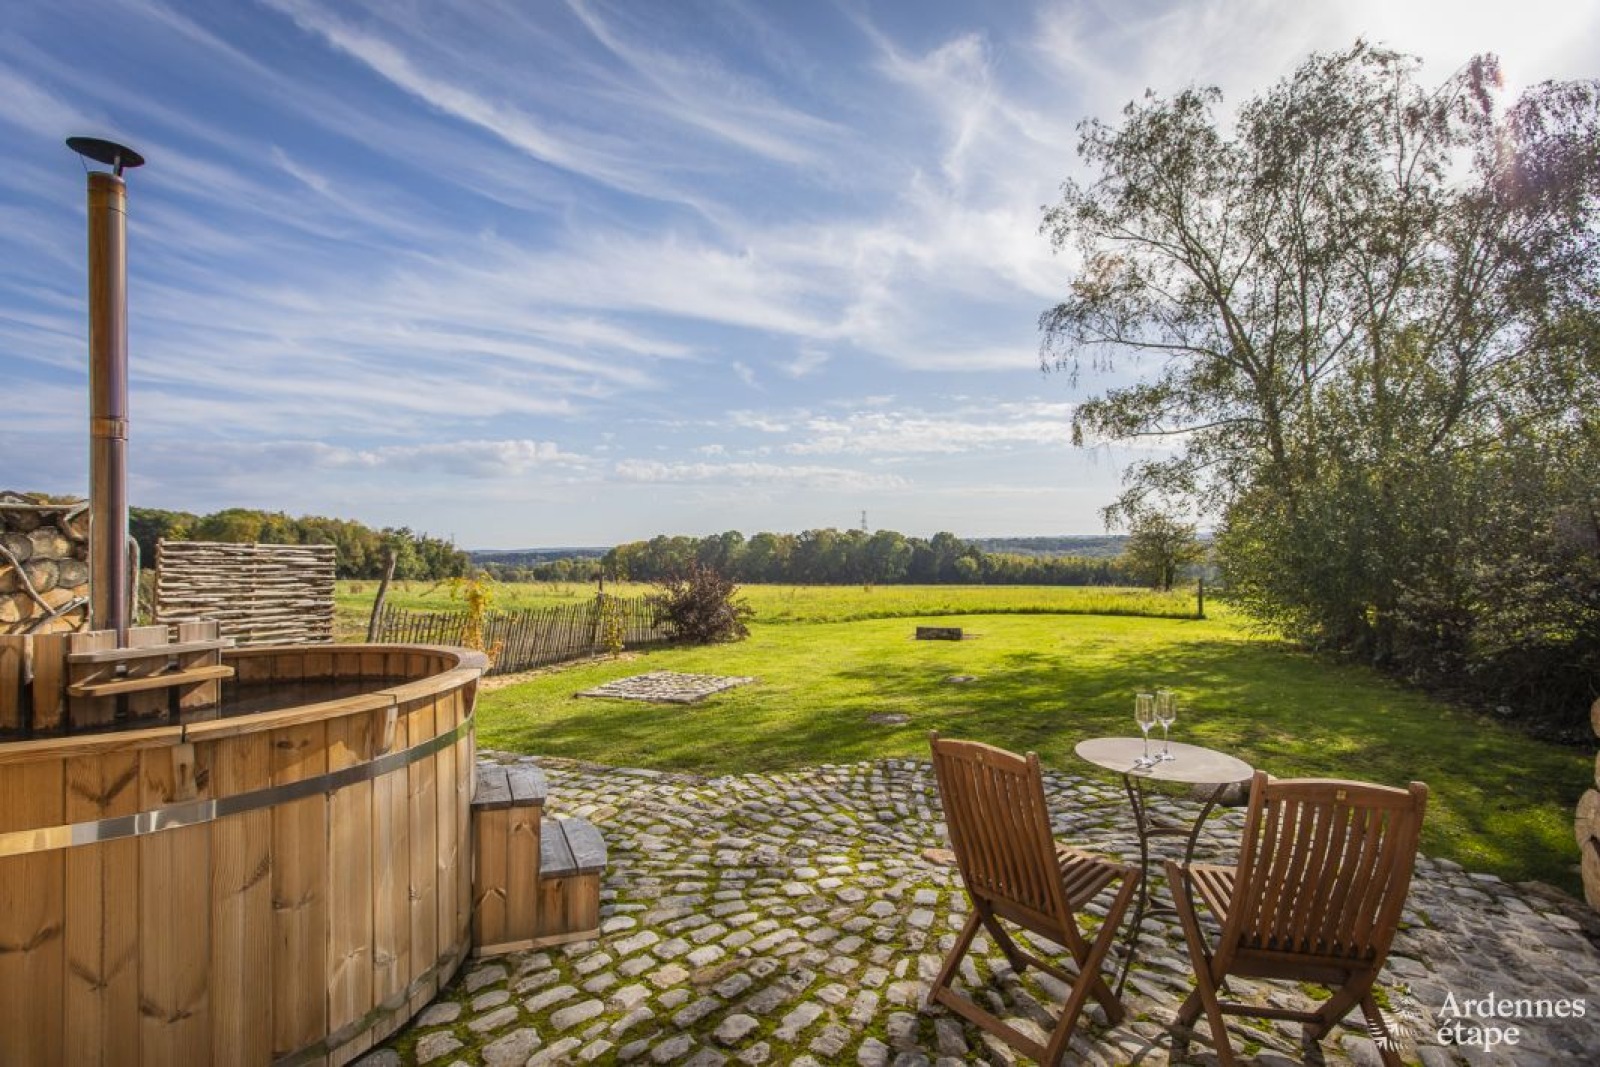 Outdoor sauna under a beautiful blue sky - Gîtes and holiday homes in the Ardennes